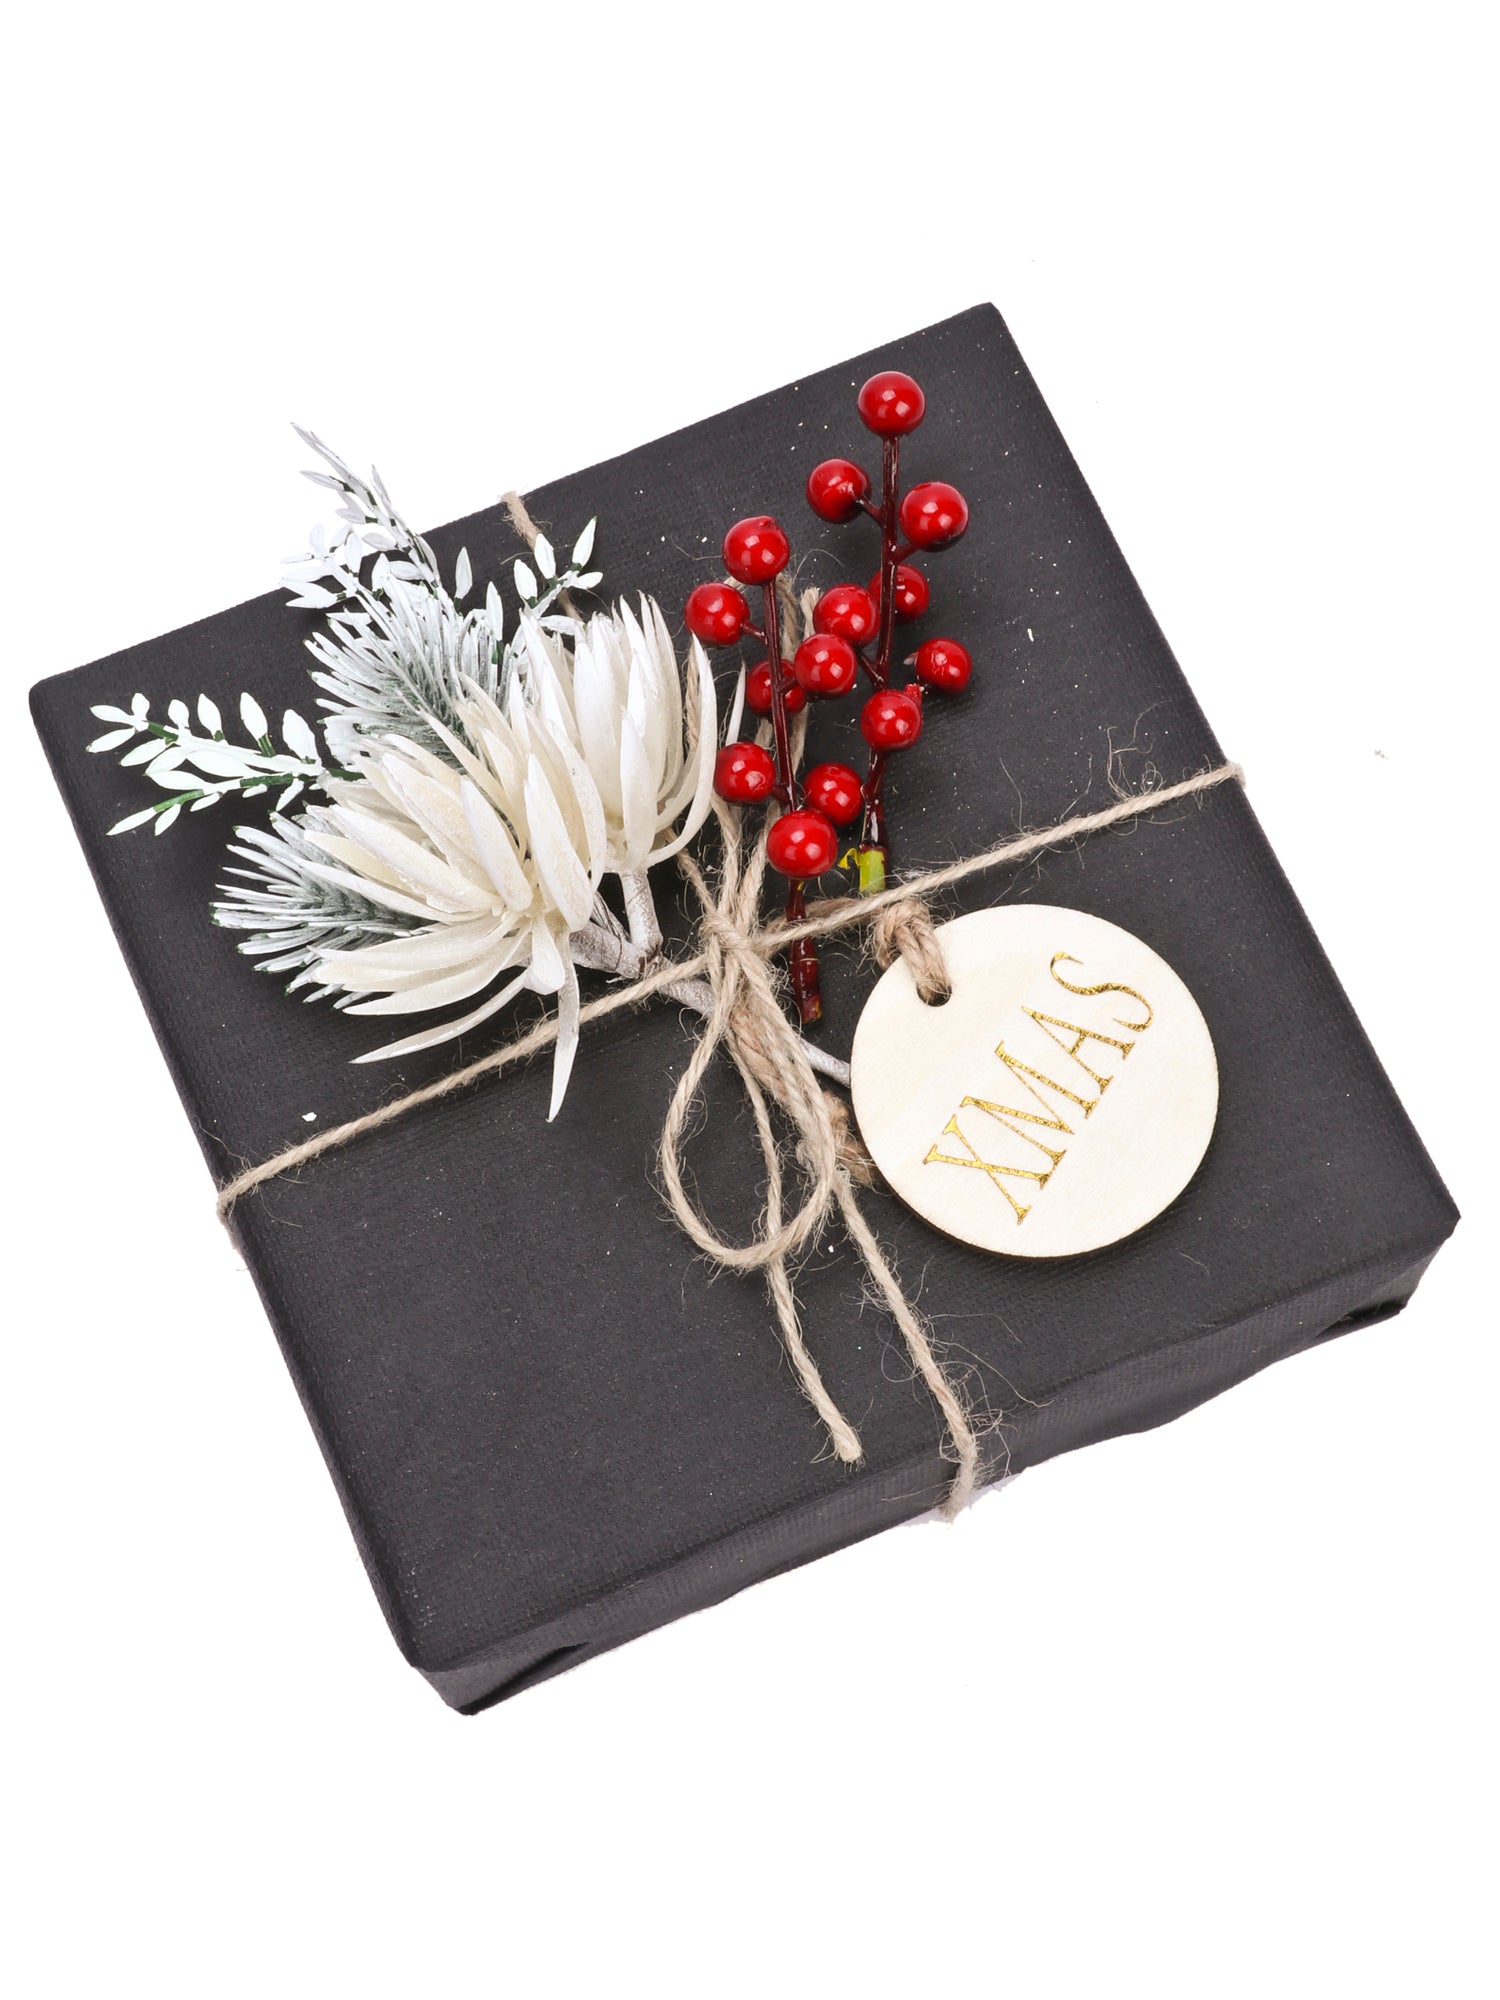 7Pcs/Set Gift Wrapping Collection - Artificial Leaves Plants, Red Berry, Gift Tags, Bells